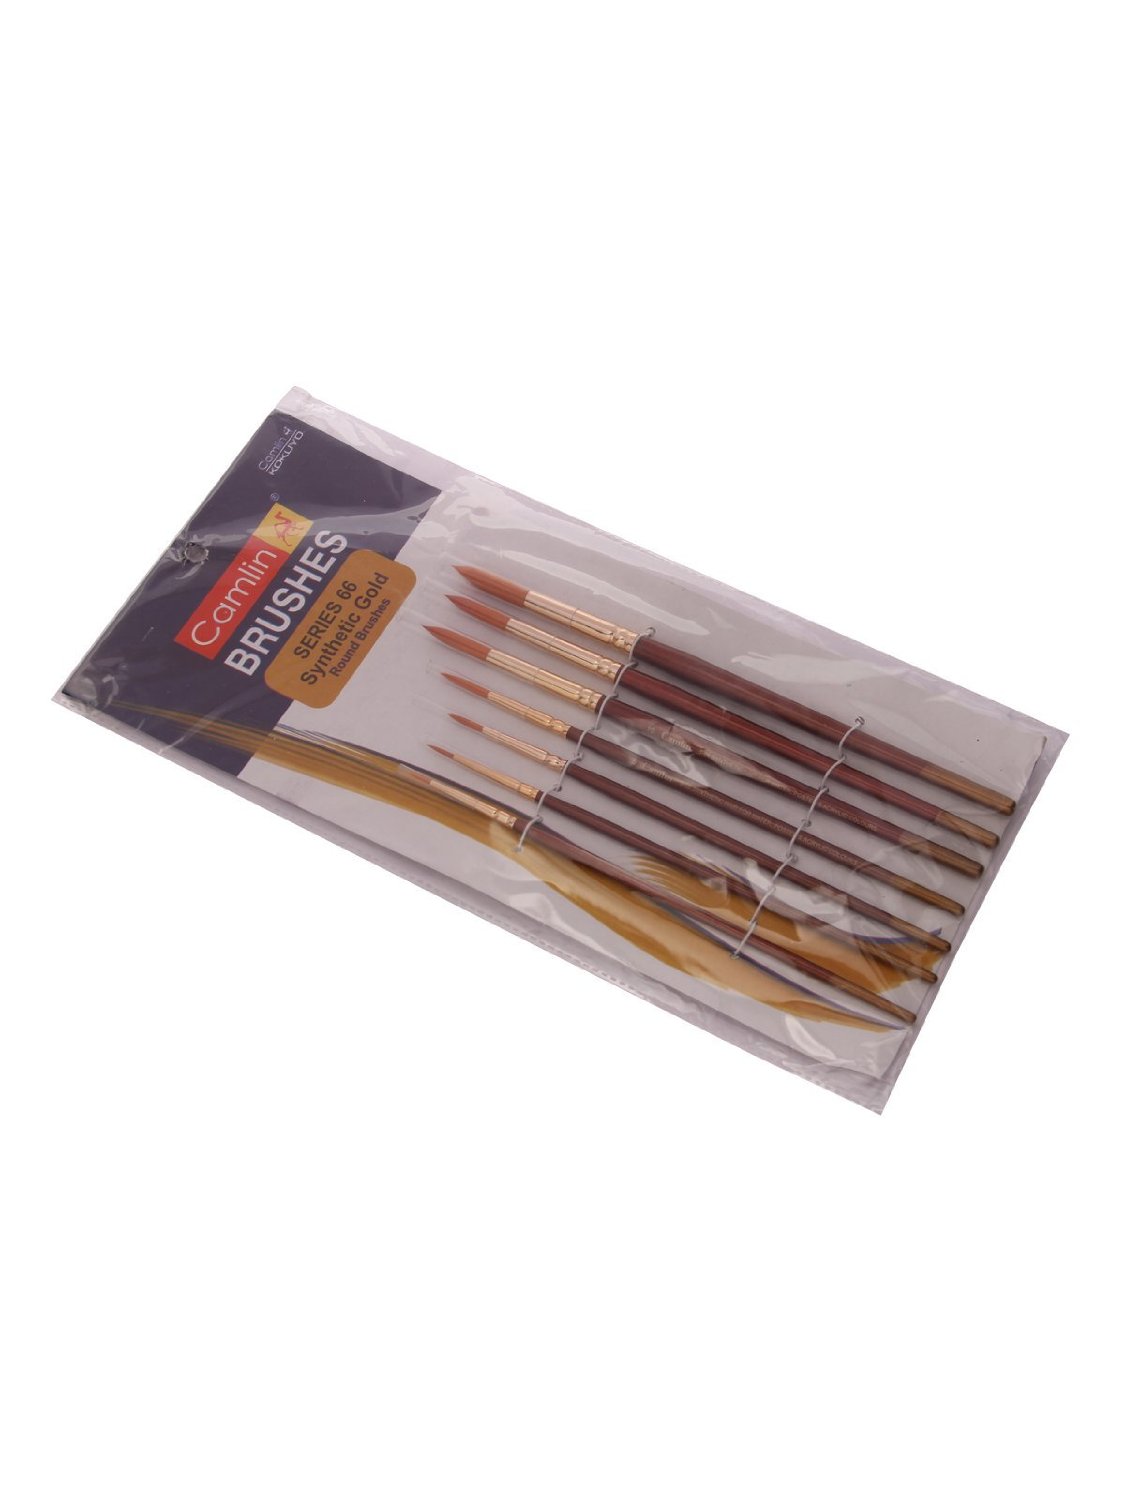 Camlin Paint Brush Series 66 - Round Synthetic Gold, Set Of 7